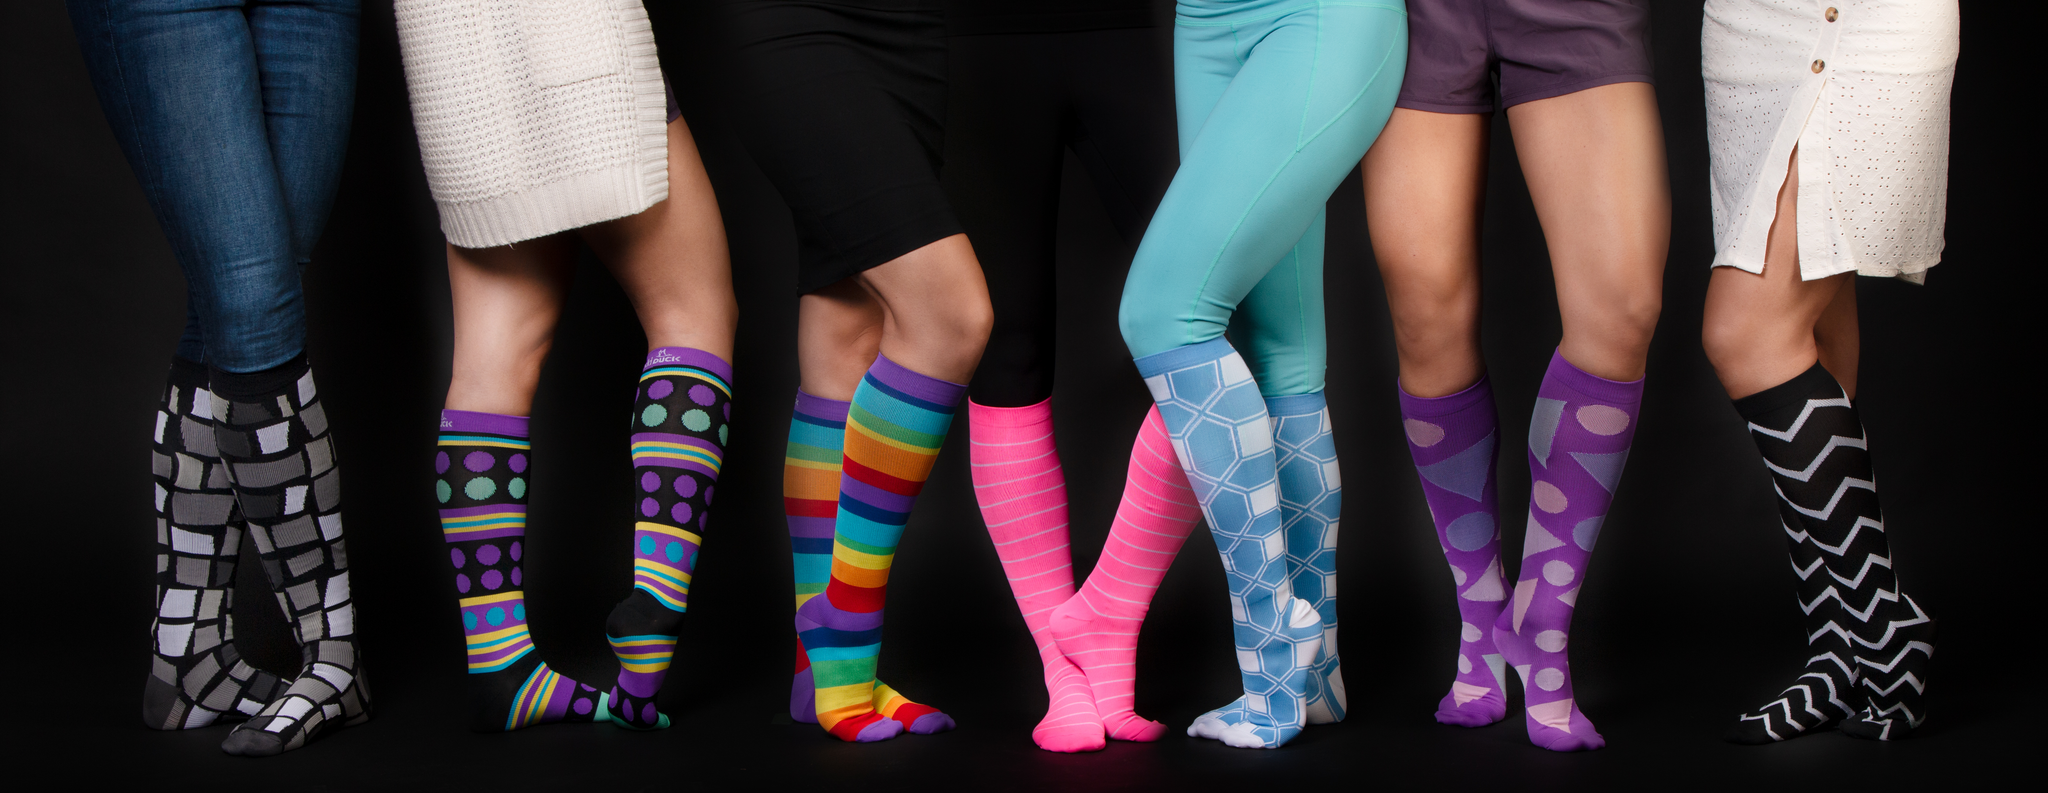 A Canadian Traveller's Guide to Compression Socks: Why You Should Never Leave Home Without Them